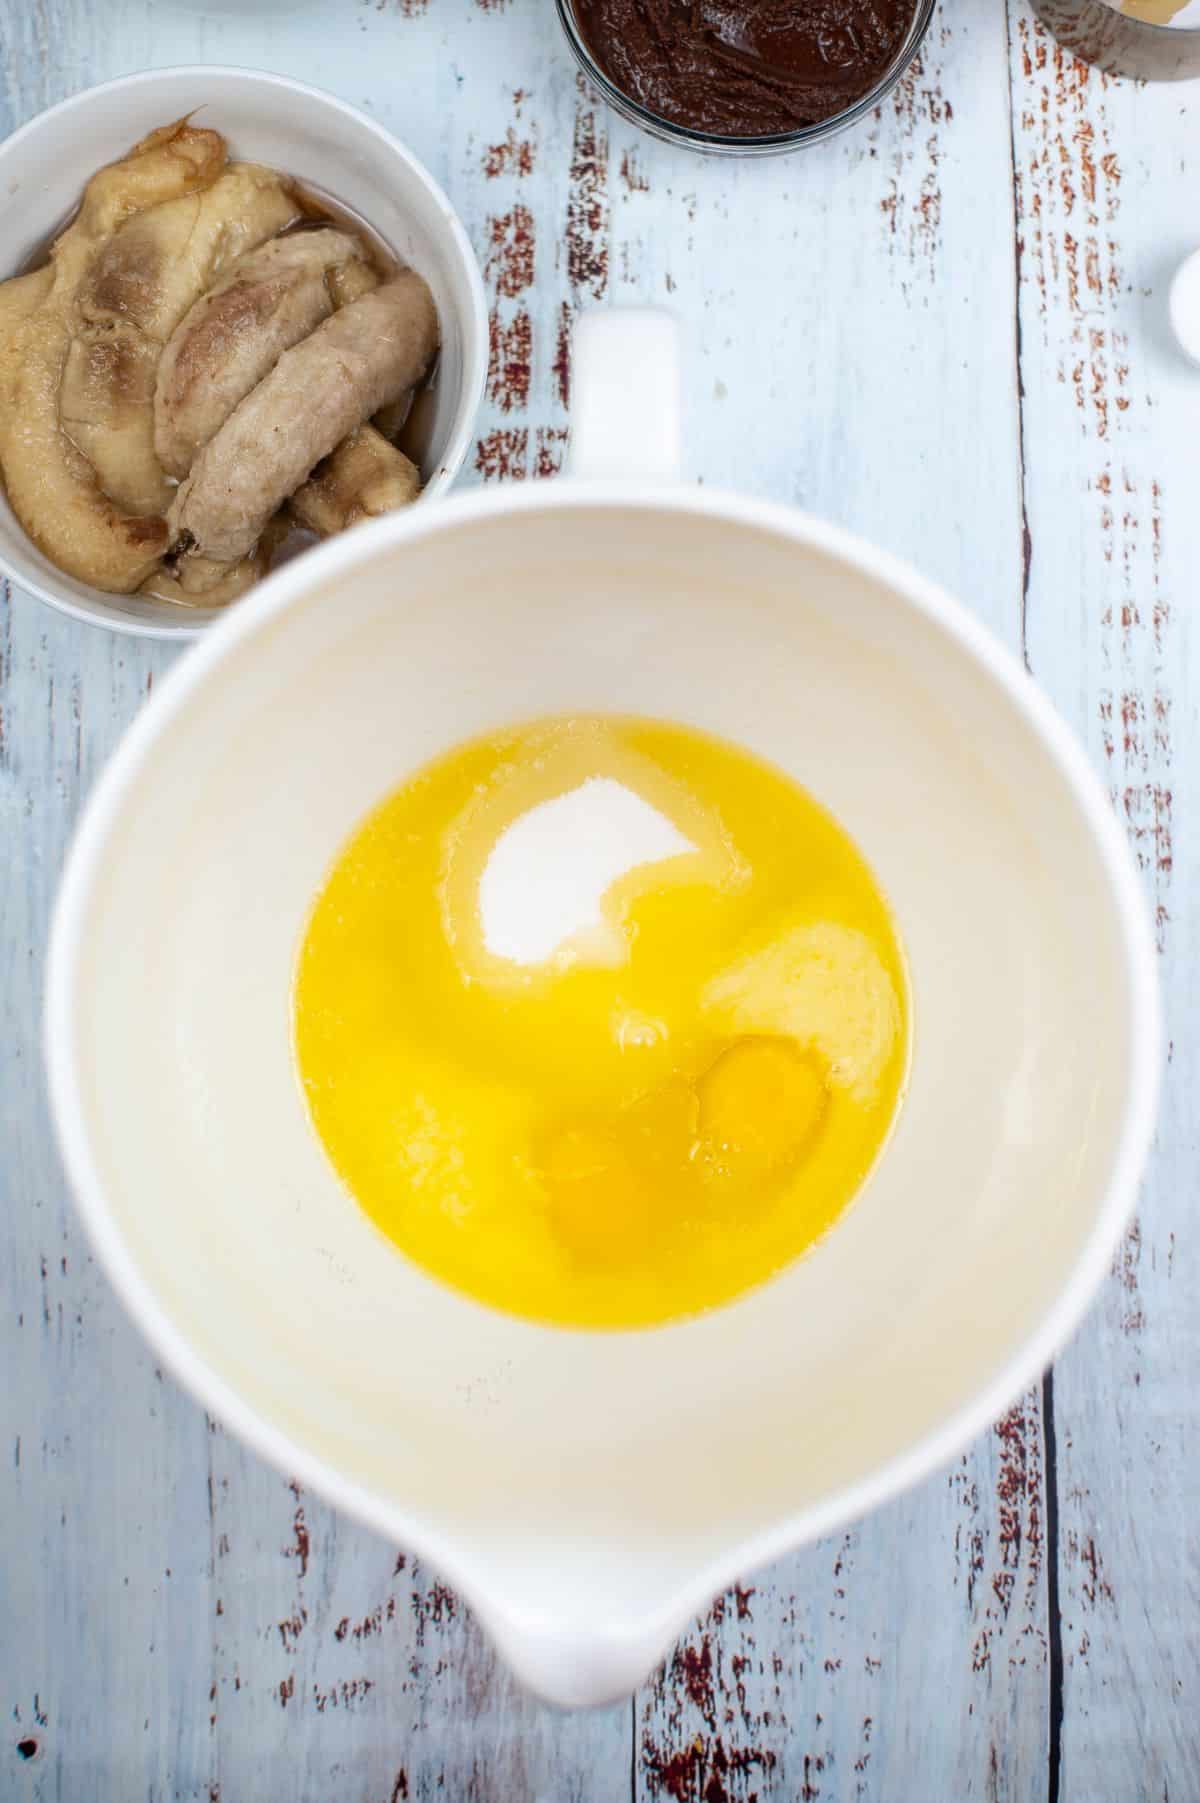 Melted butter, eggs, and sugar in a large mixing bowl next to a bowl of bananas